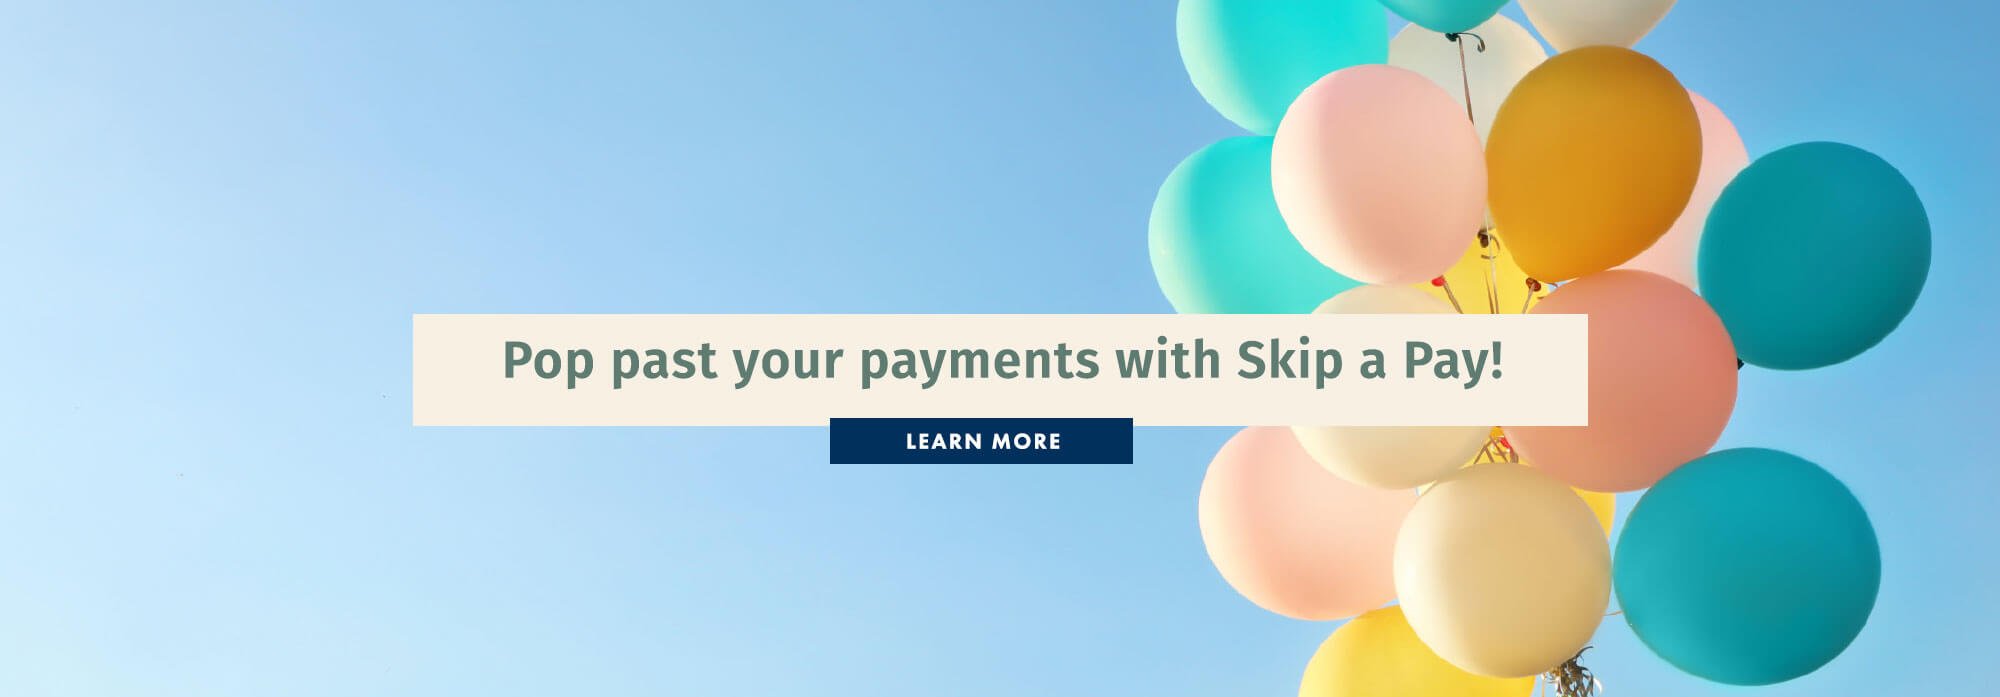 Pop past your payments with Skip a Pay!